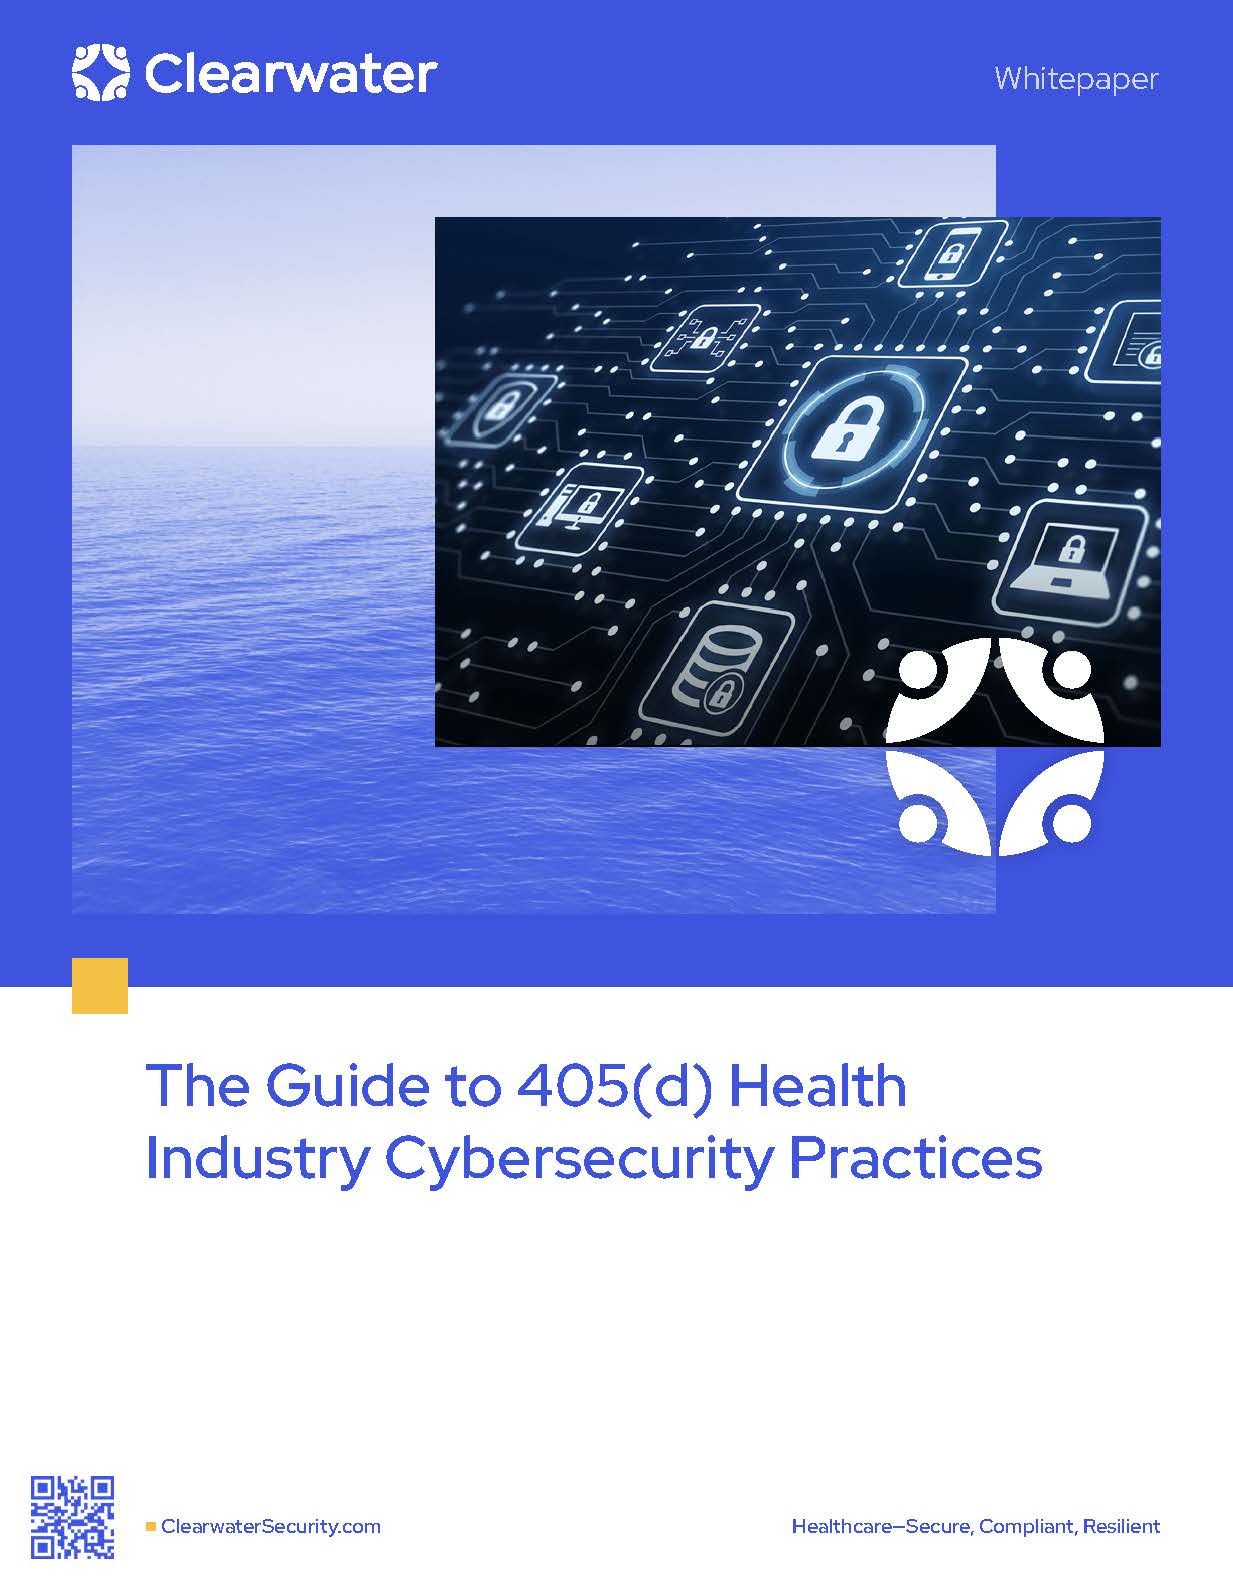 The Guide to 405(d) Health Industry Cybersecurity Practices by Clearwater